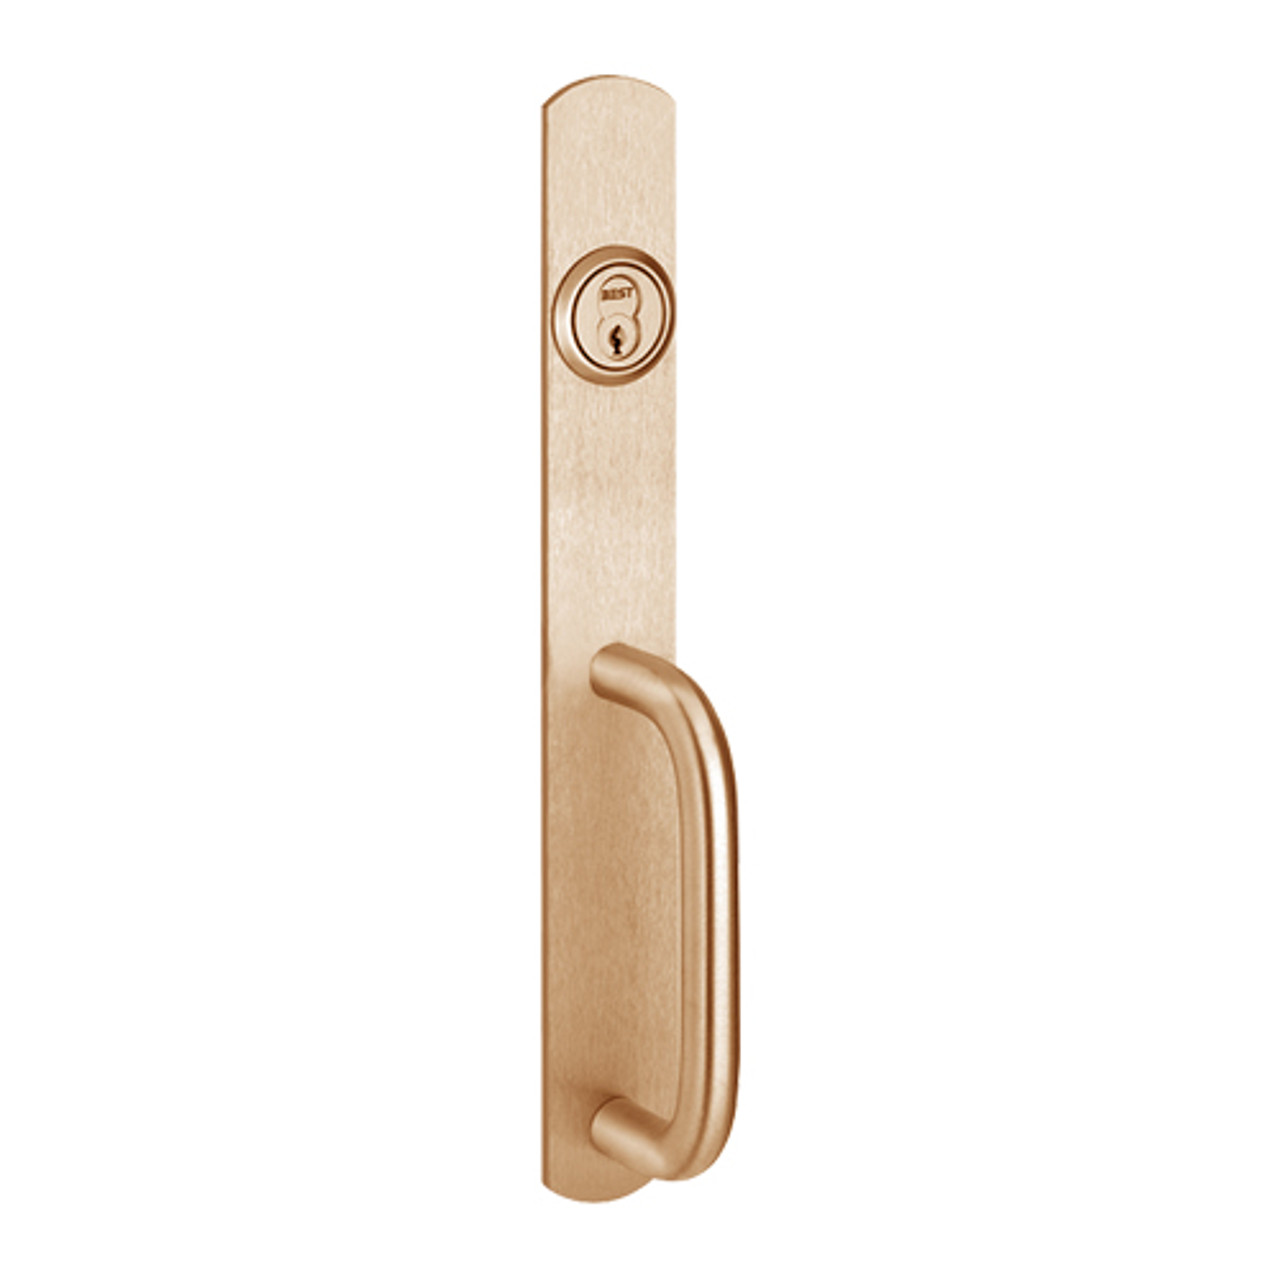 2005C-612 PHI Key Controls Thumb Piece Trim with C Design Pull for Apex Narrow Stile Device in Satin Bronze Finish